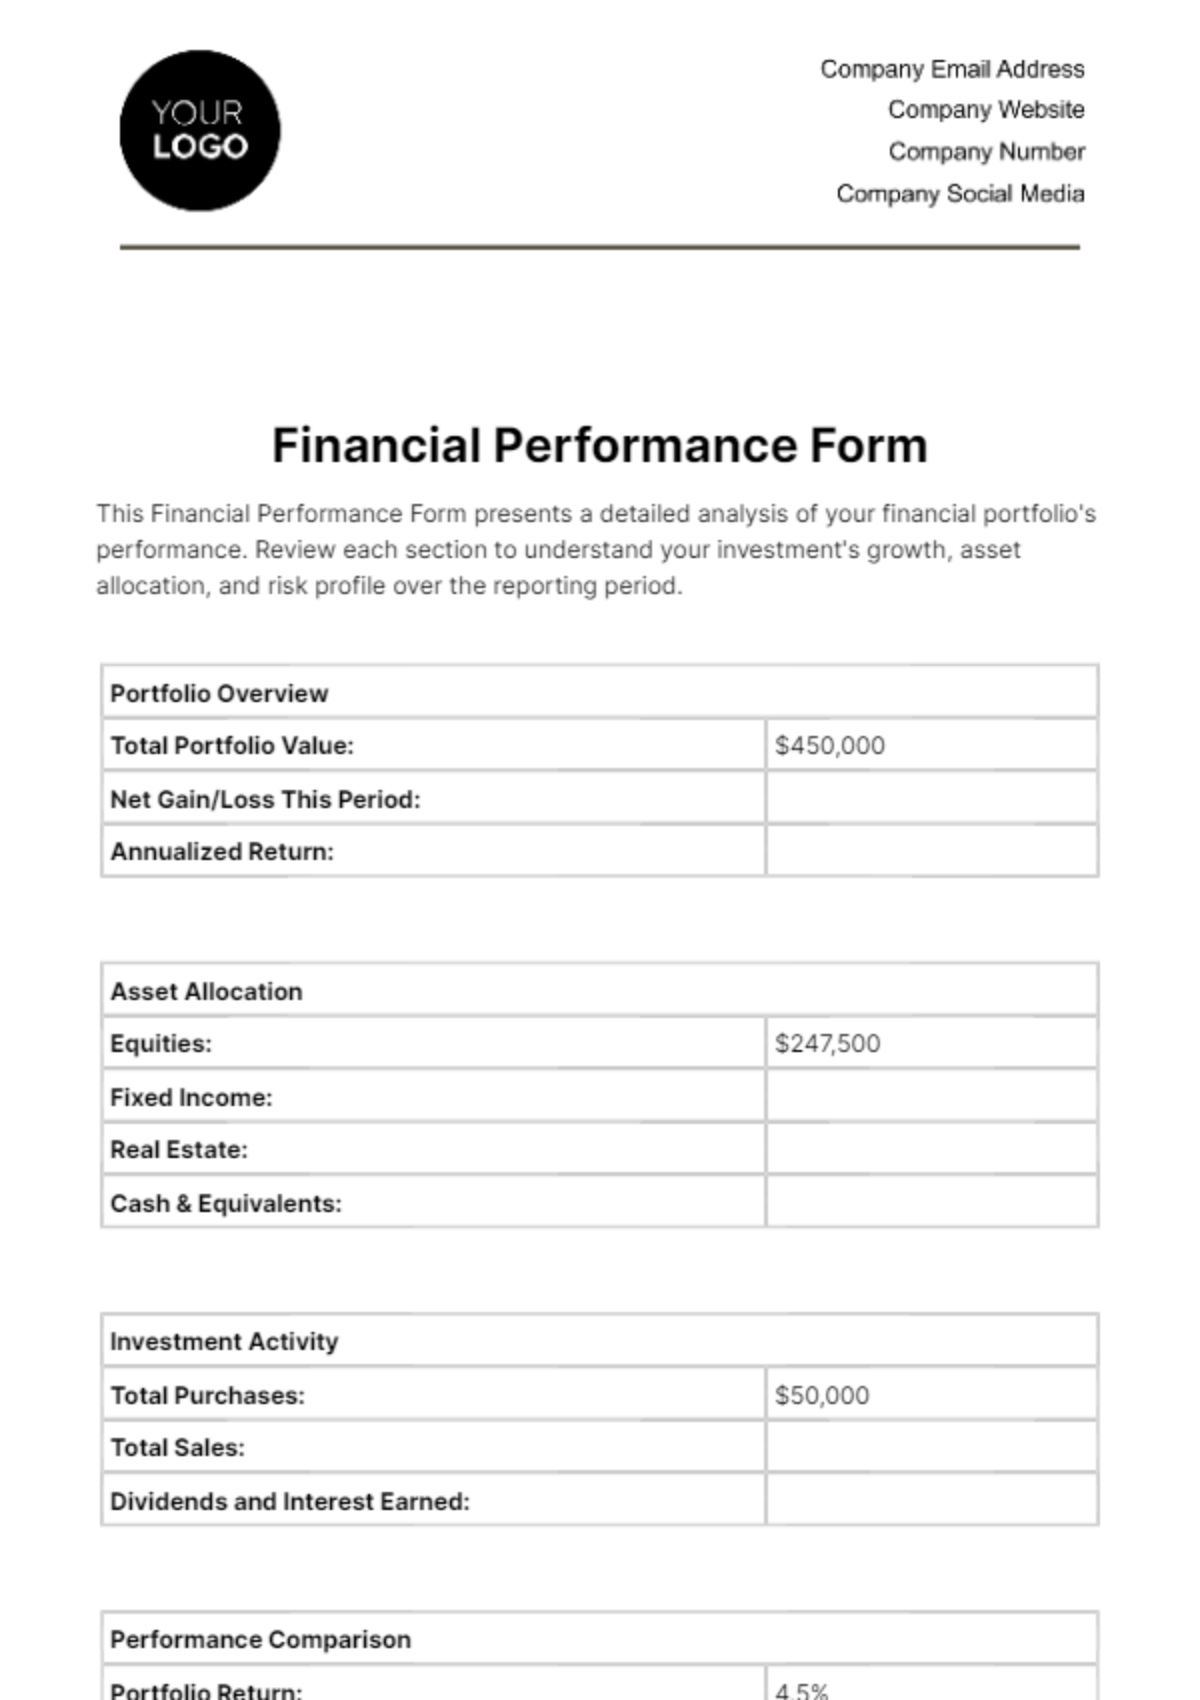 Free Financial Performance Form Template